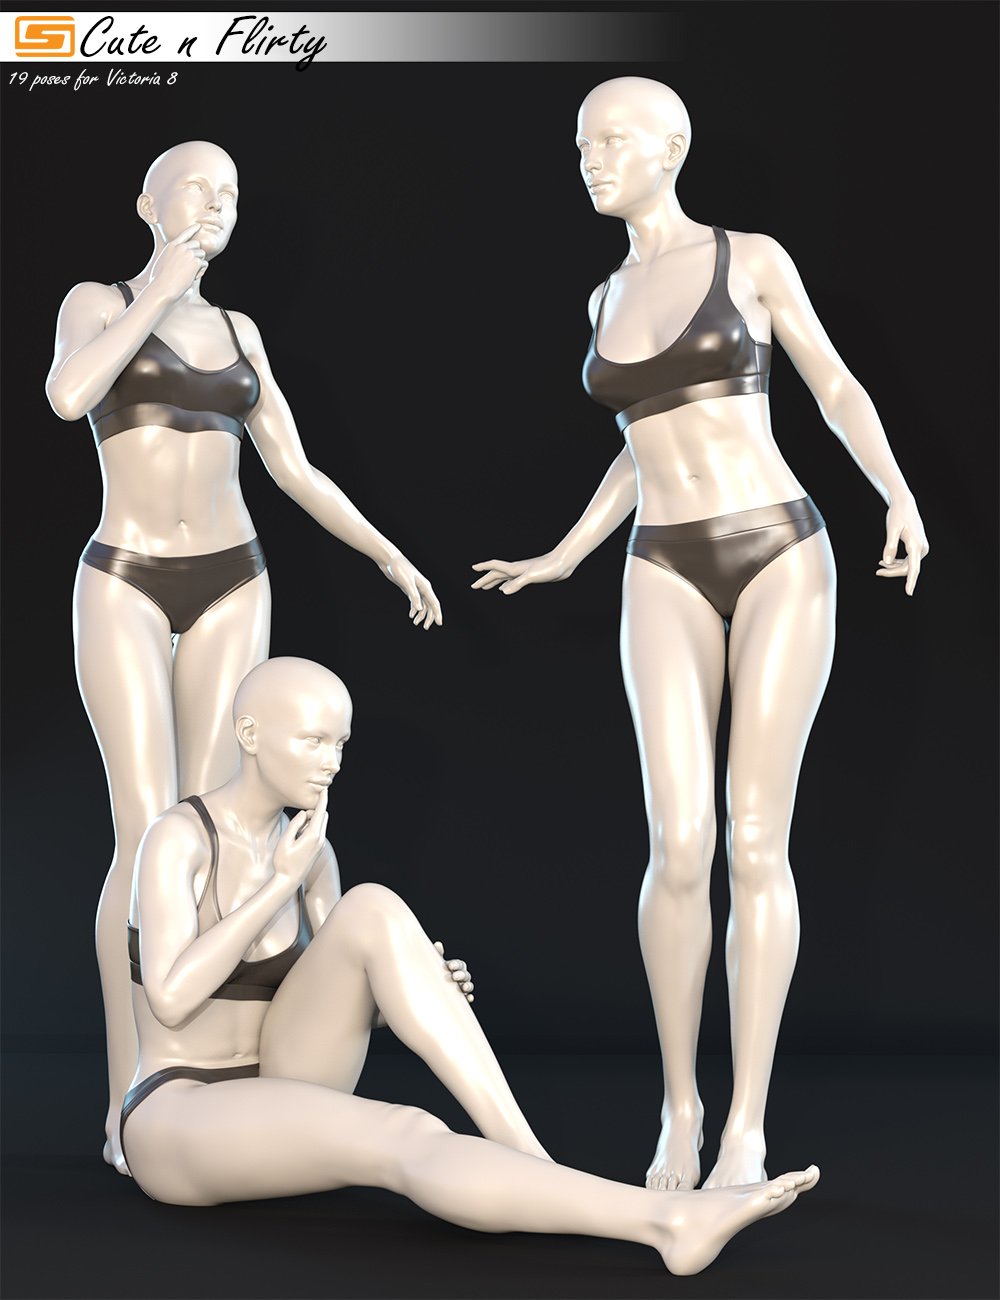 Cute N Flirty - Poses for Victoria 8 by: Sedor, 3D Models by Daz 3D